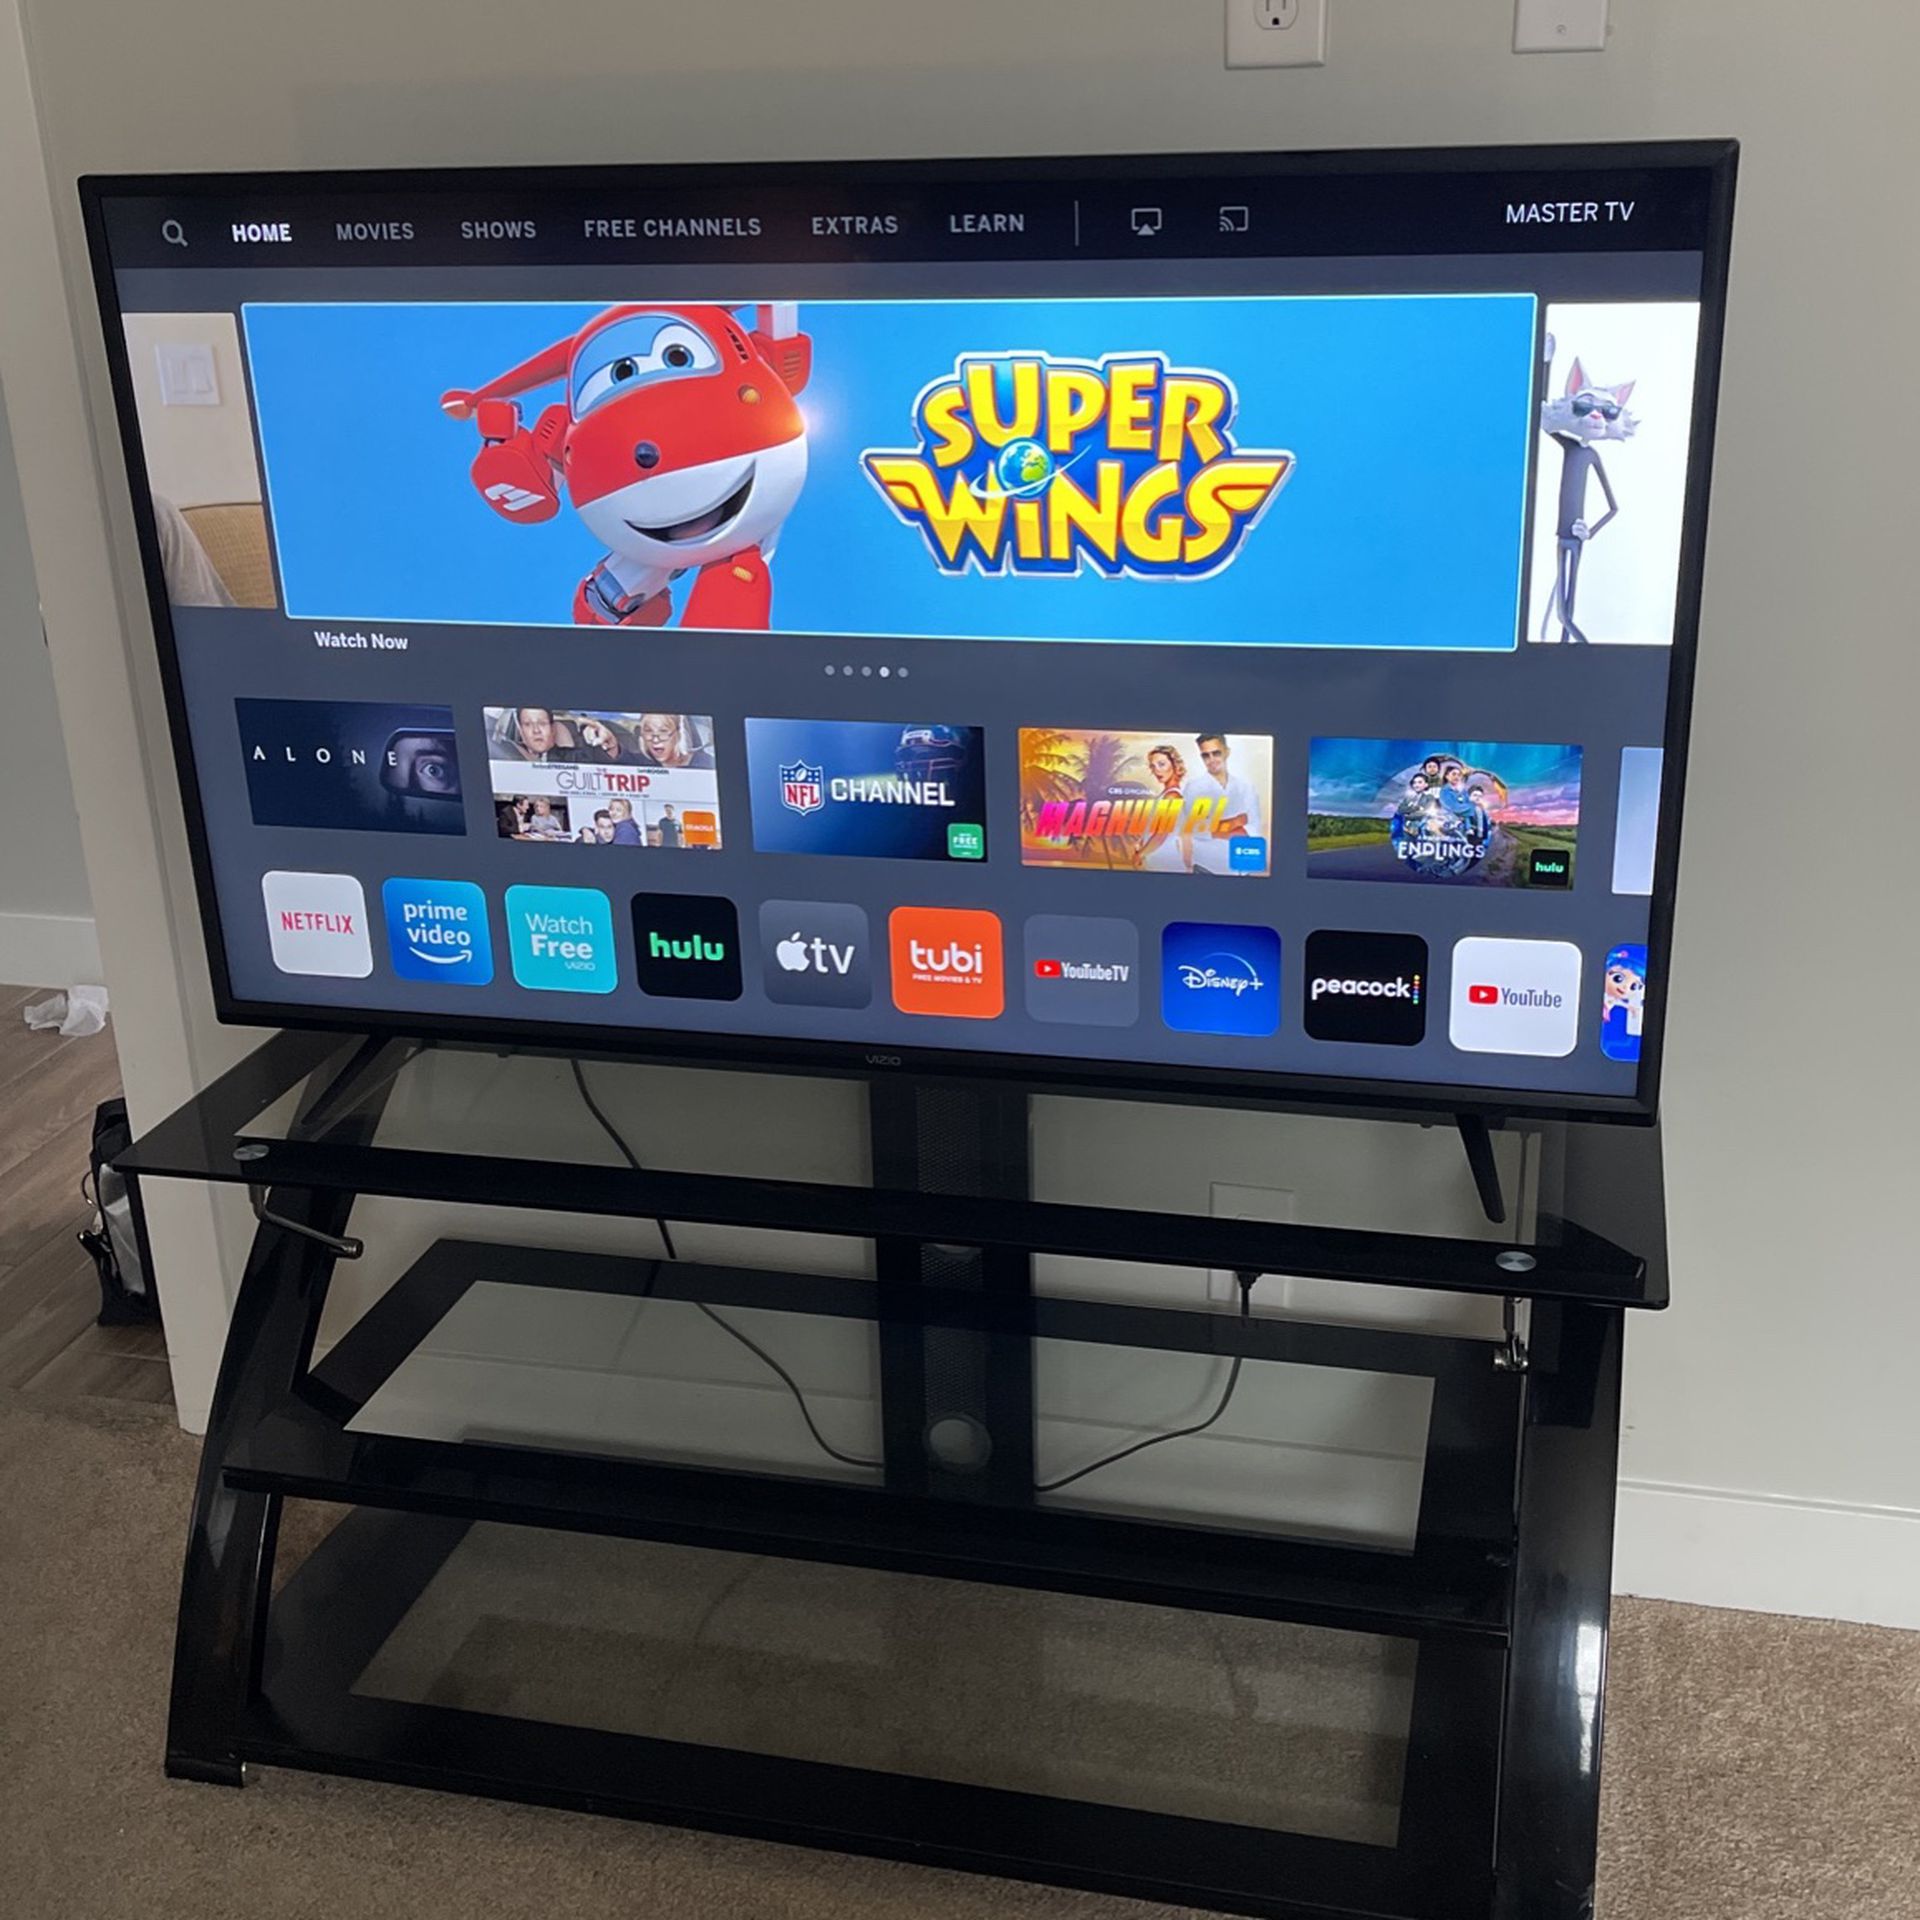 TV & TV stand